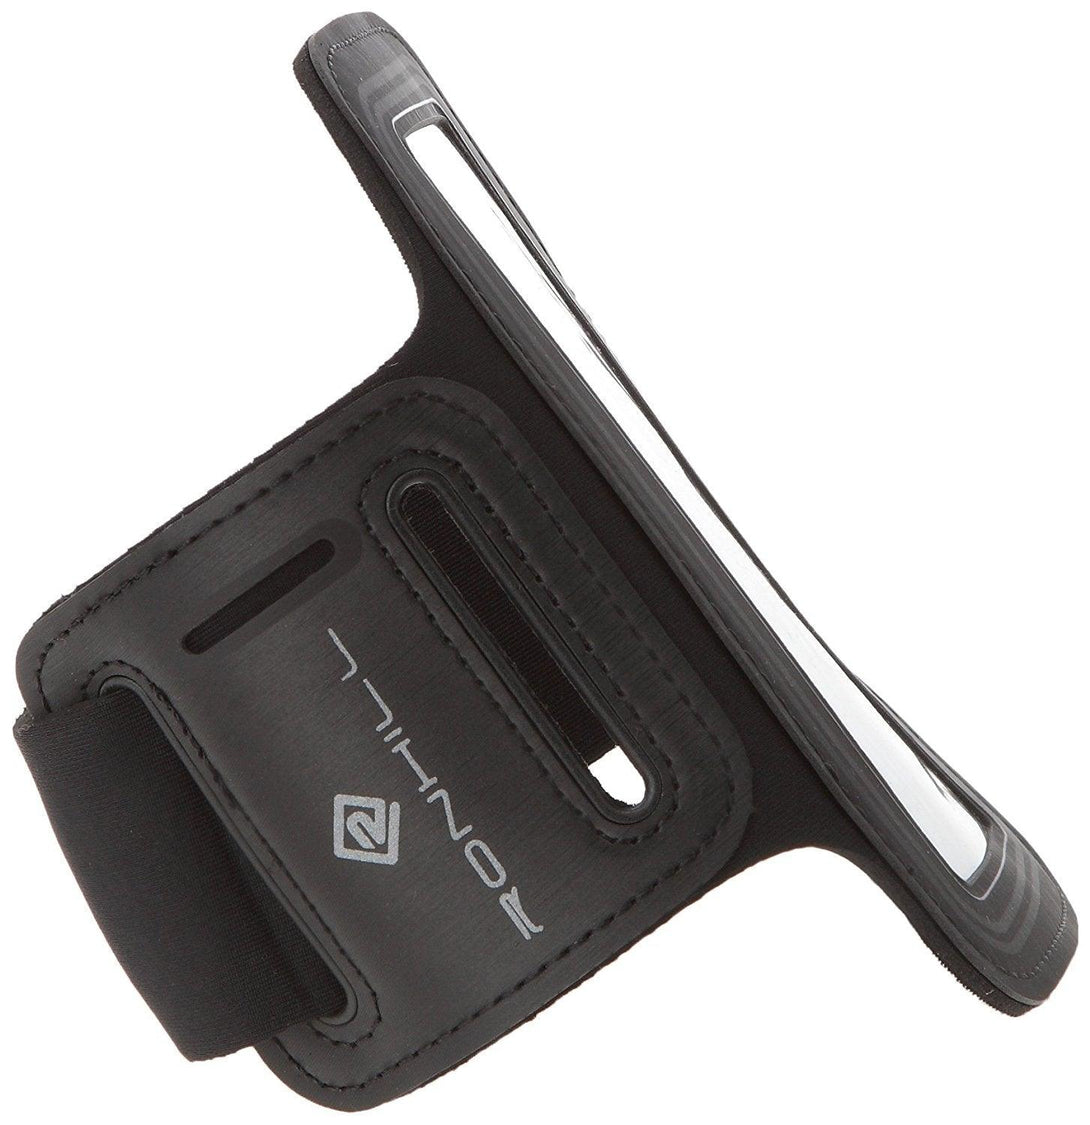 Ronhill Phone Carrier 